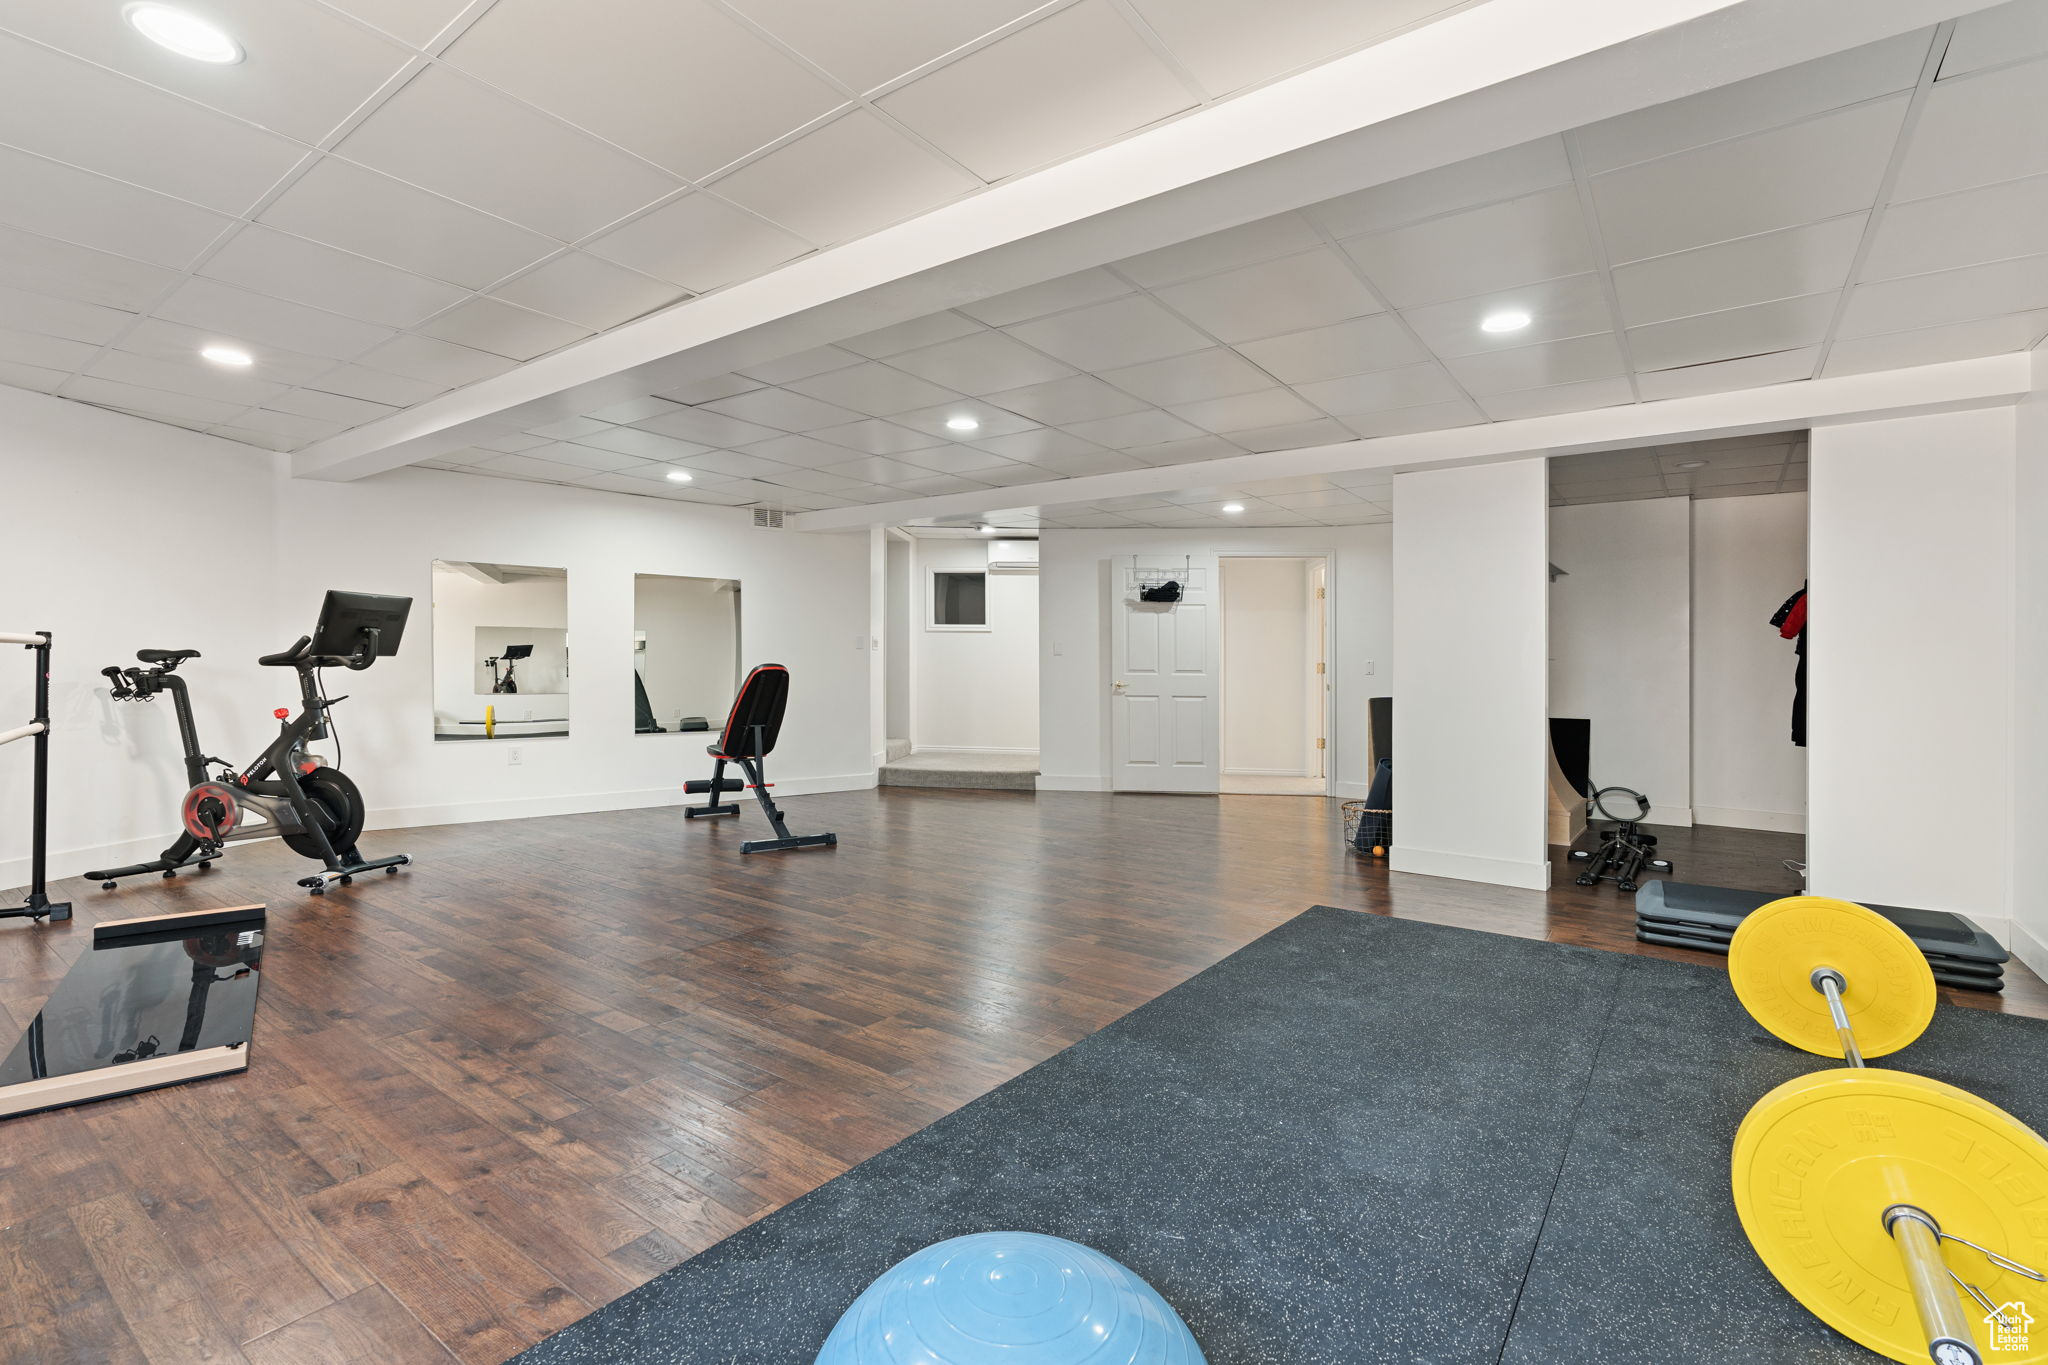 Exercise room with a drop ceiling and hardwood / wood-style flooring